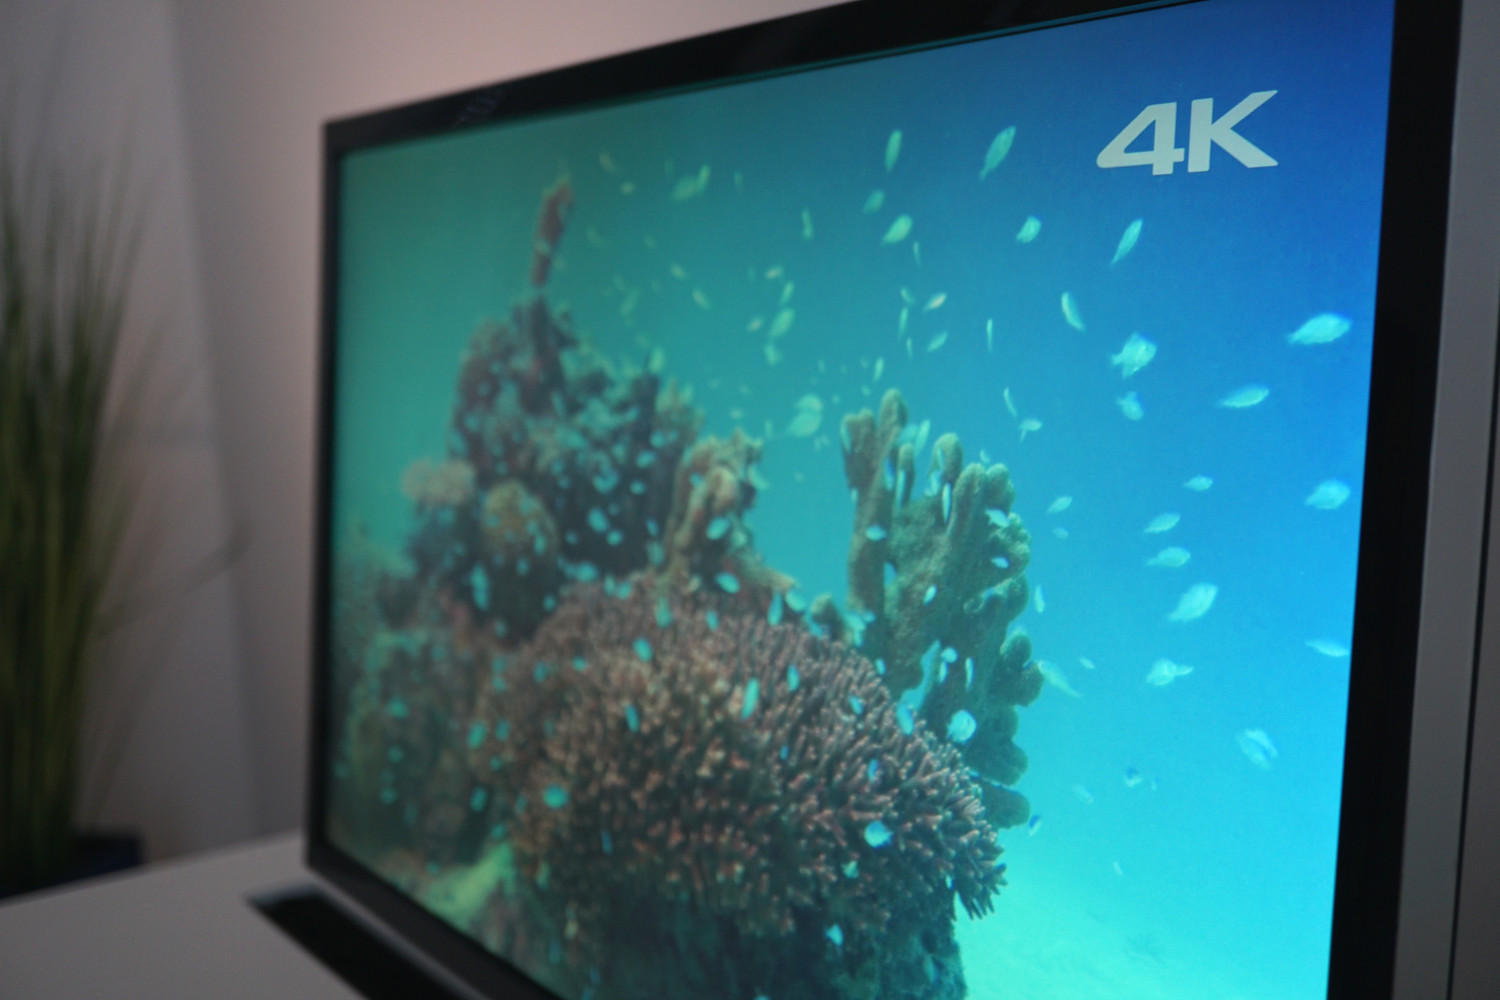 What is the difference between Full HD, UHD and 4K?